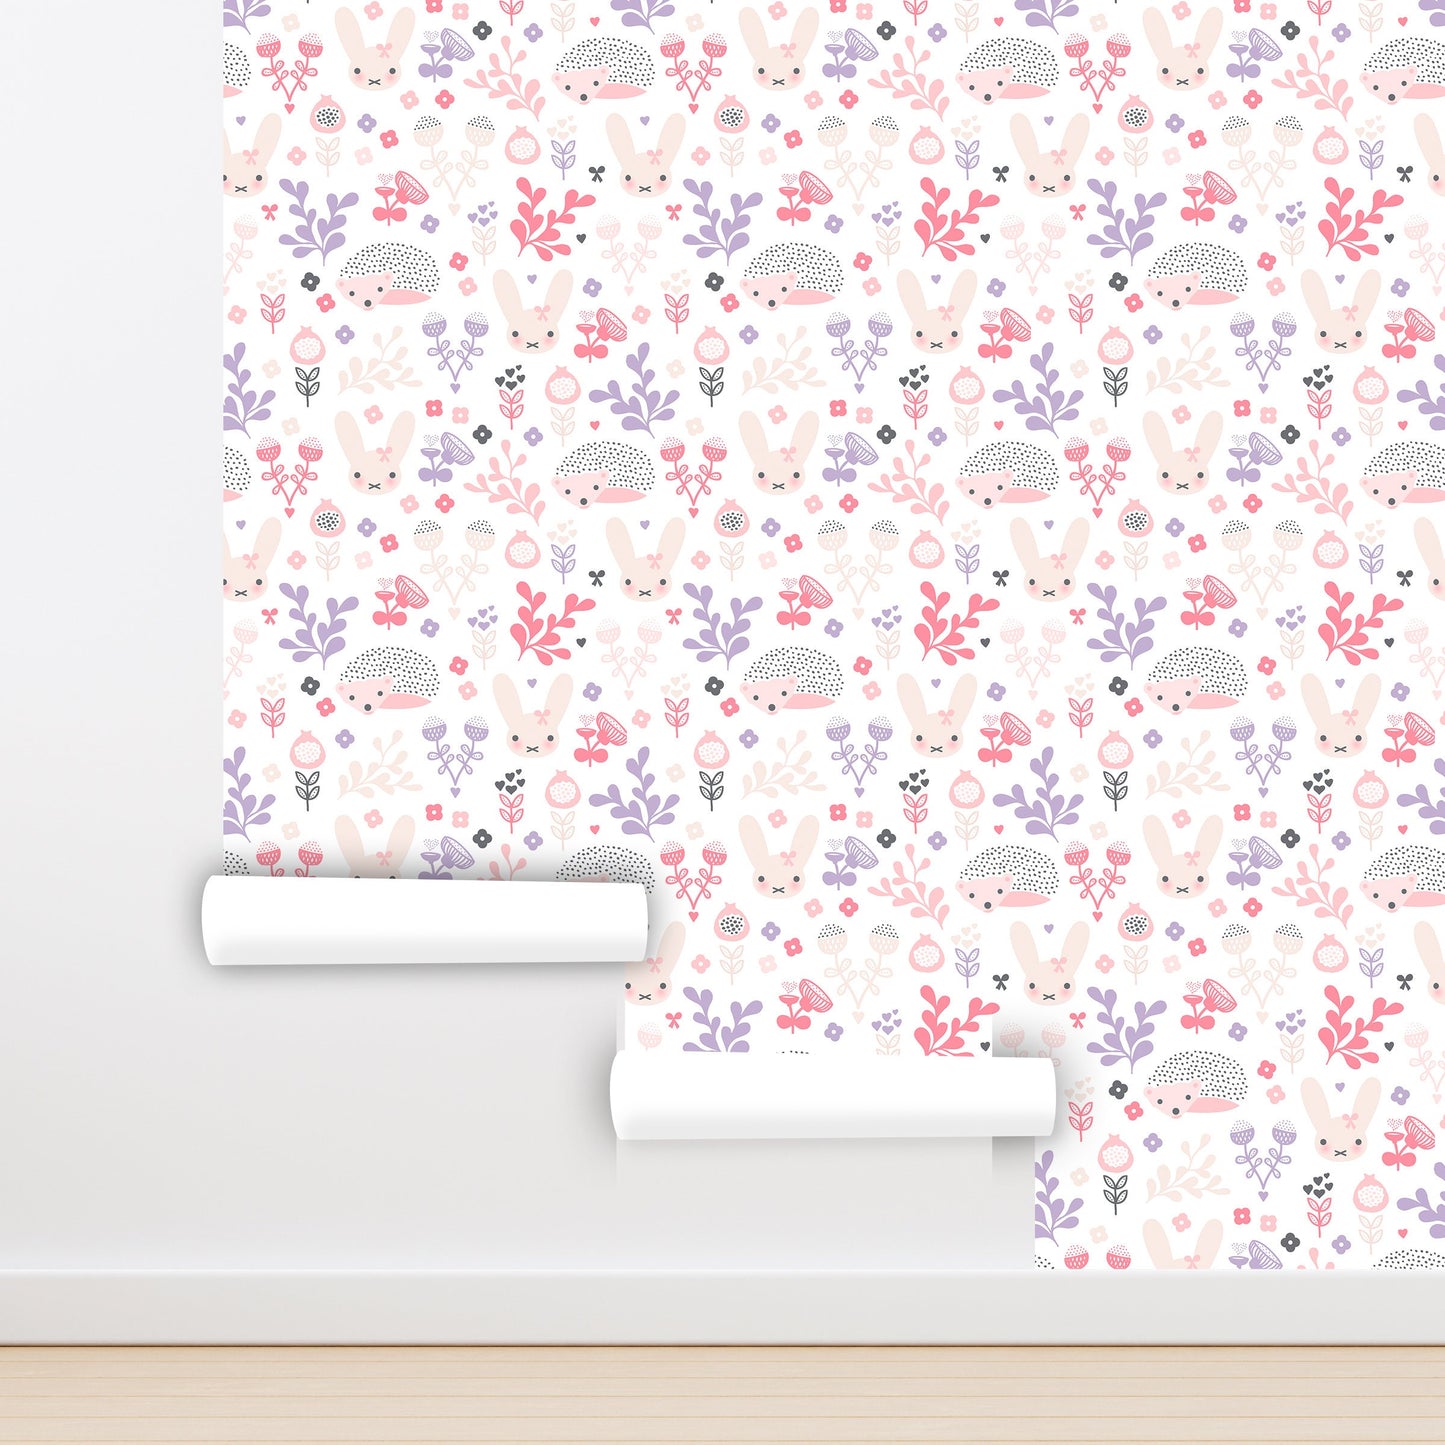 Bunny Wallpaper Peel and Stick, Hedgehog Wallpaper, Rabbit Wallpaper, Girls Room Wallpaper, Nursery Wallpaper, Removable Wall Paper